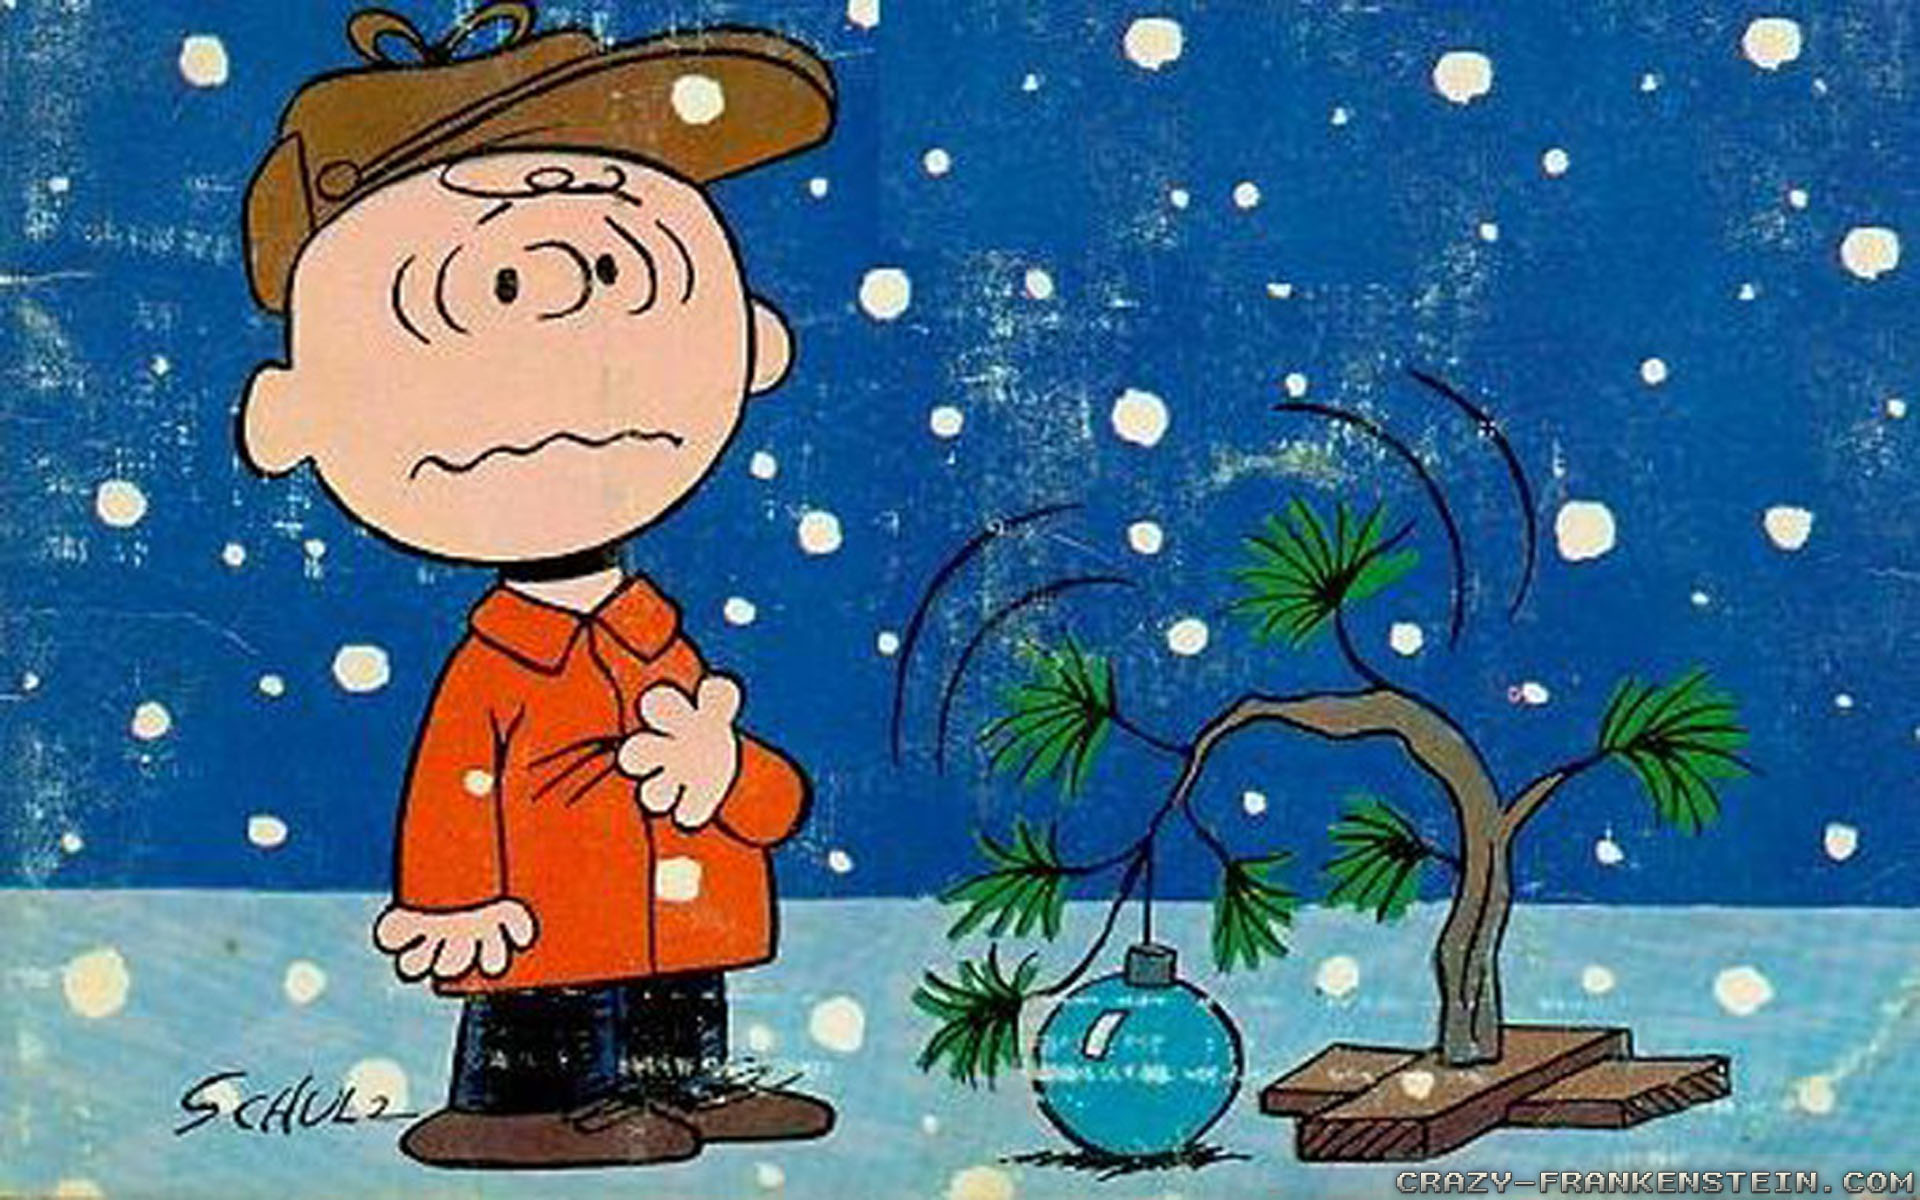 Charlie Brown Christmas Tree Wallpaper Image Pictures Becuo